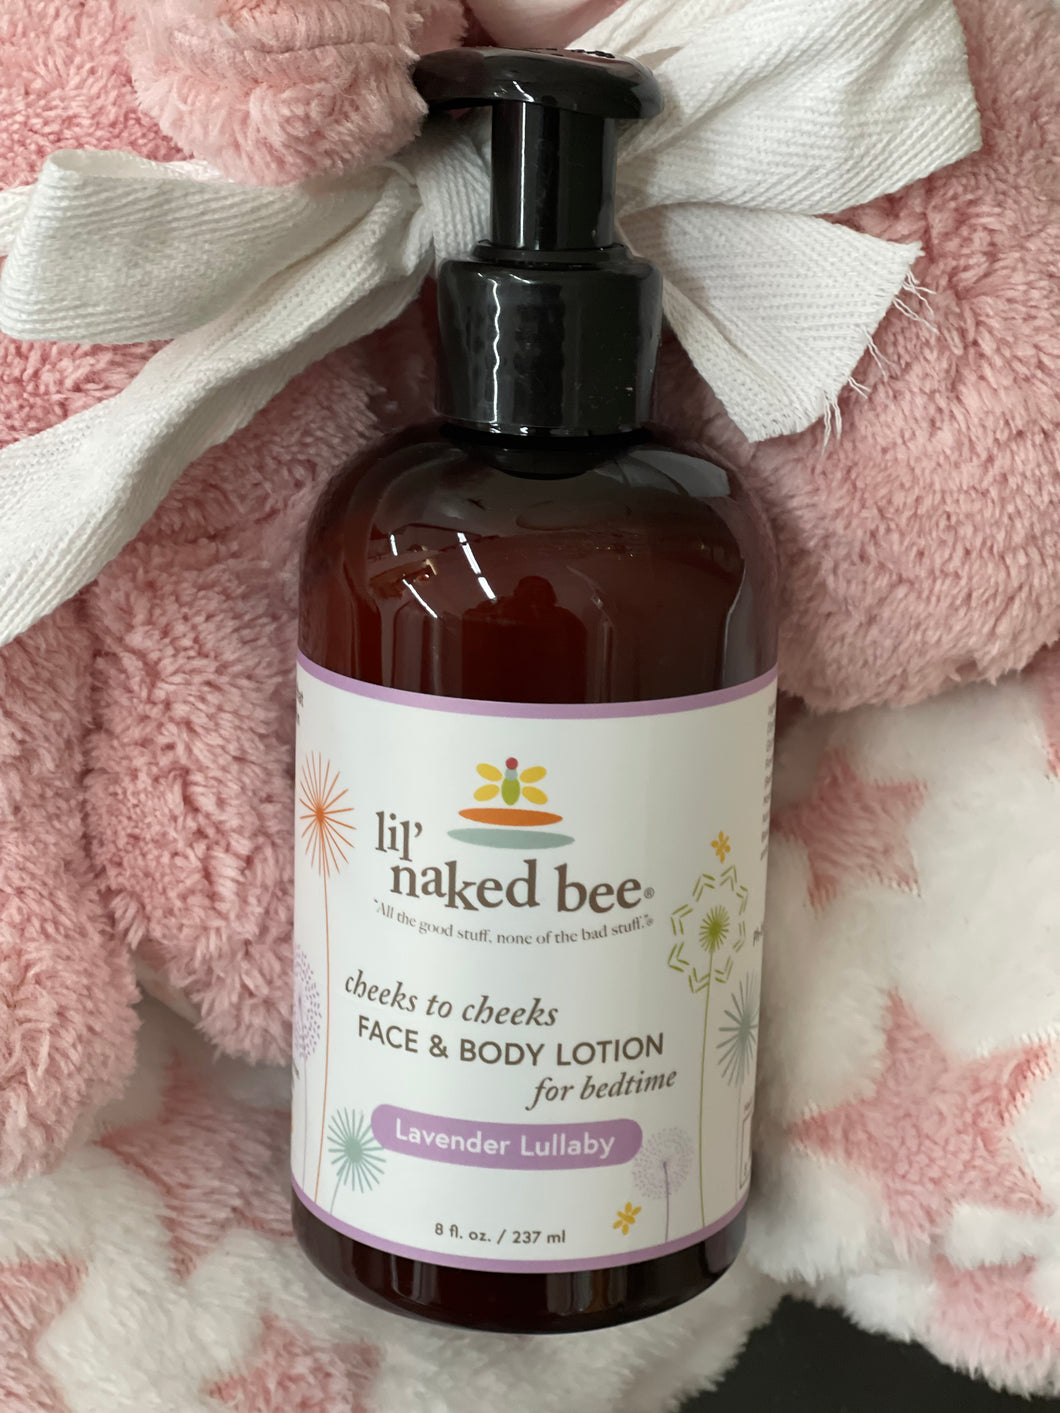 Cheeks to Cheeks Face & Body Lotion for Bedtime